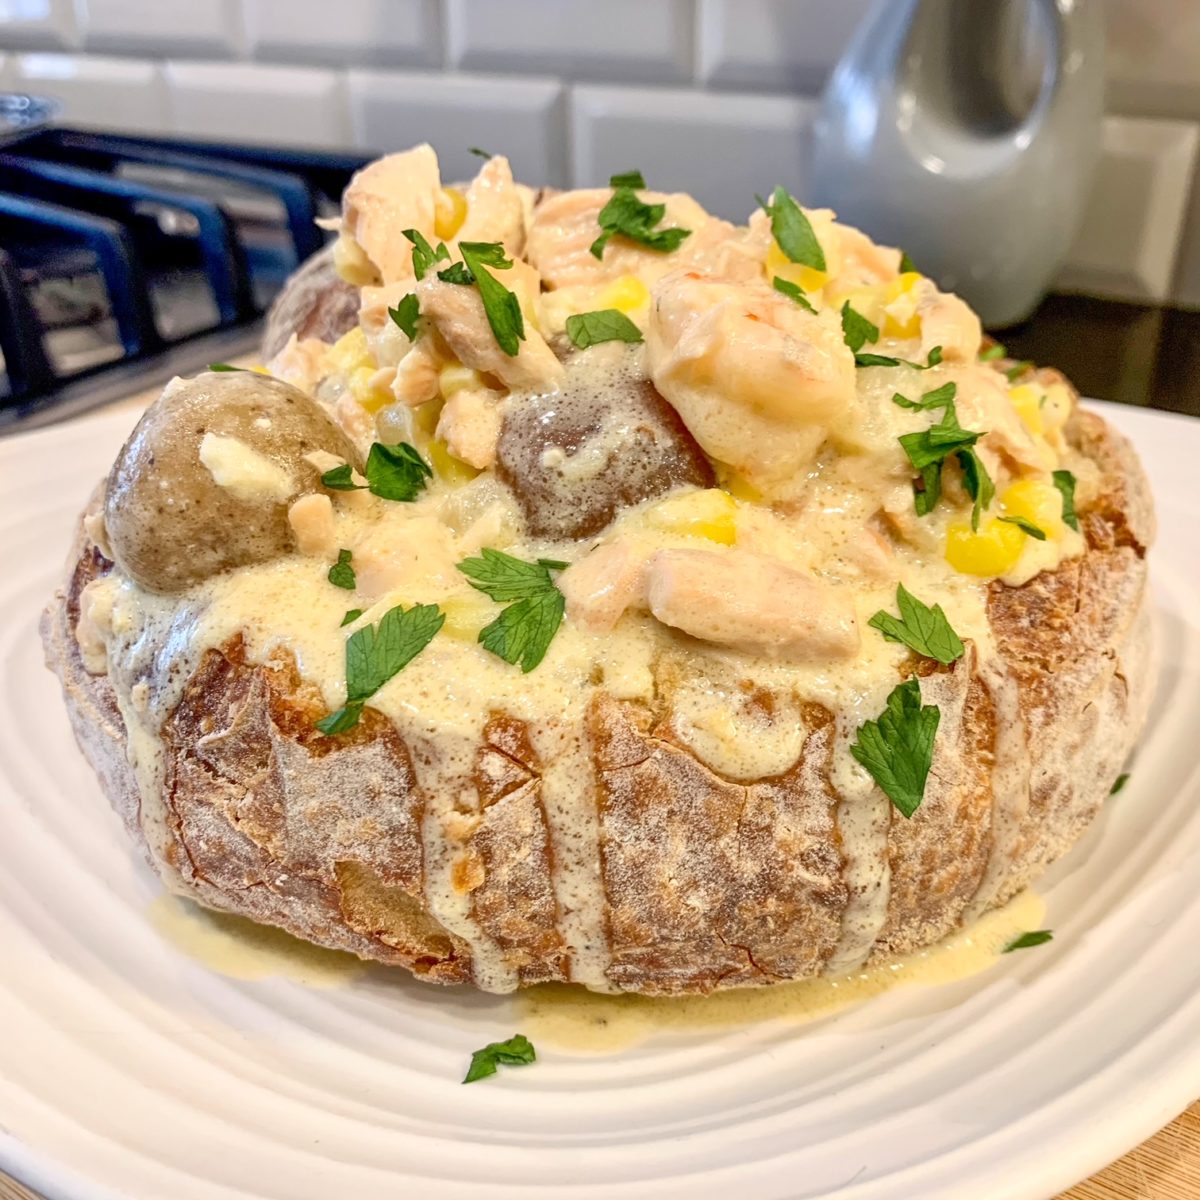 30 Minute Seafood Chowder Bread Bowls from Ayesha Curry